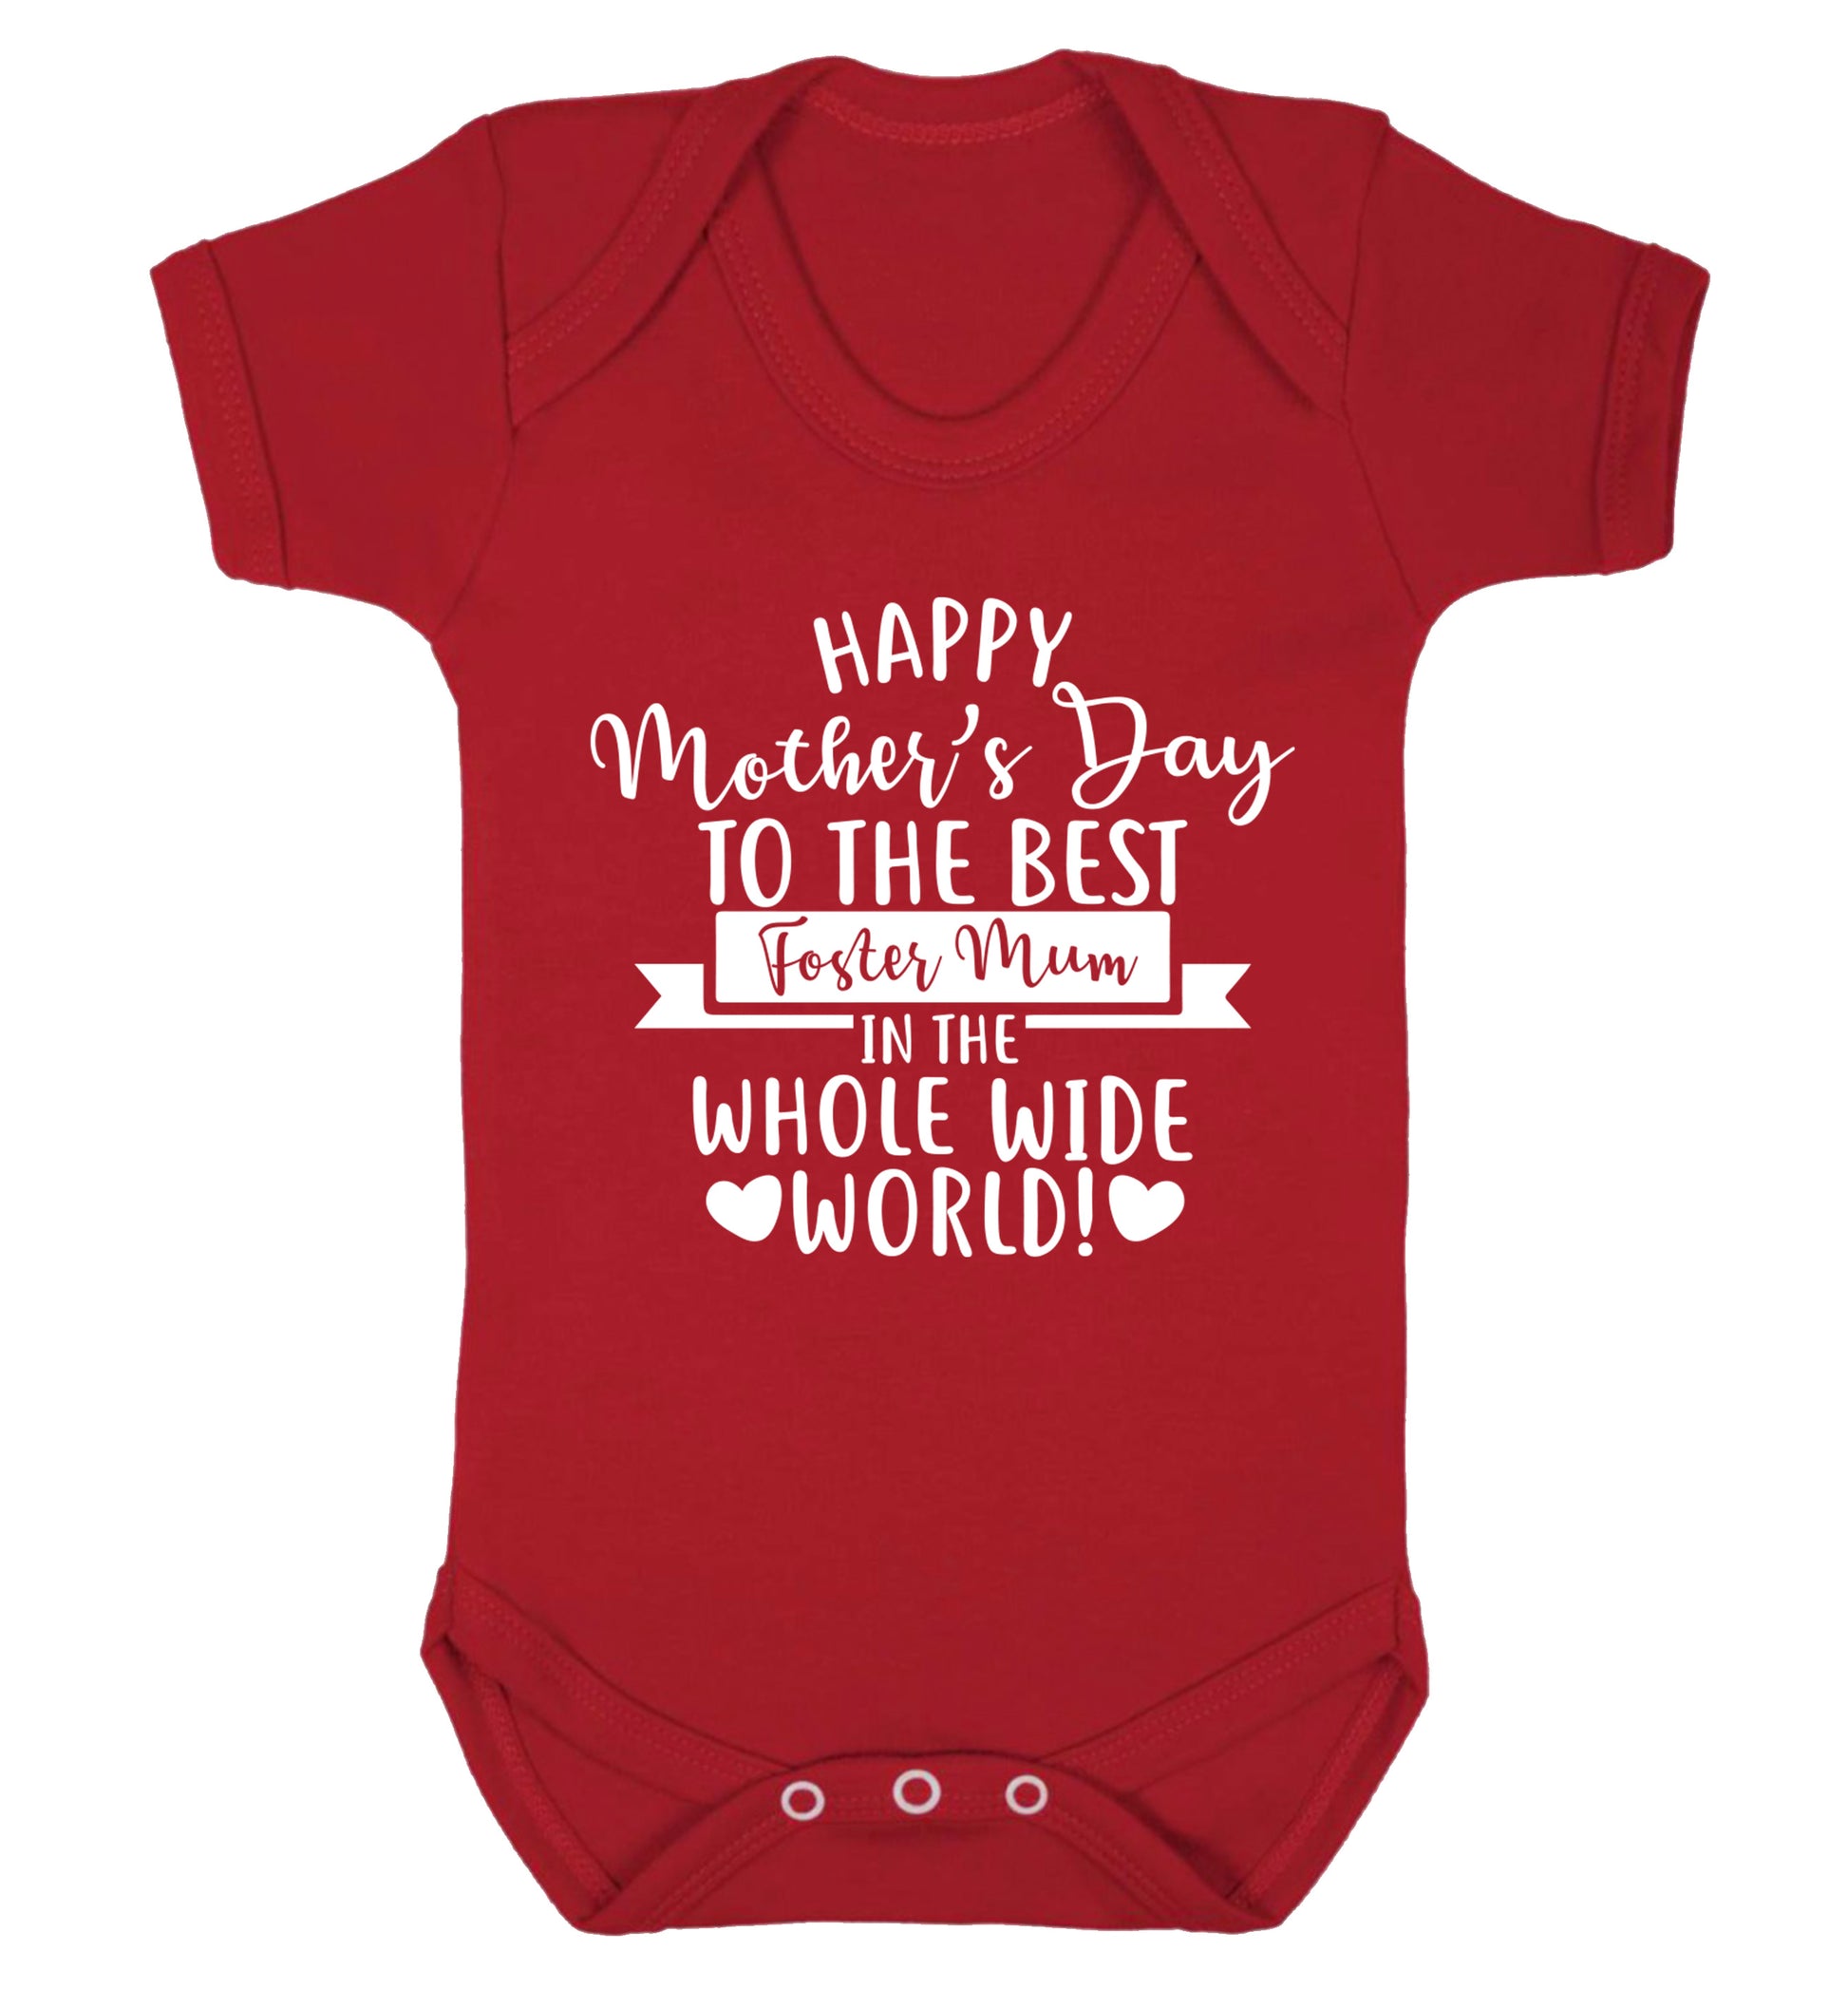 Happy mother's day to the best foster mum in the world Baby Vest red 18-24 months